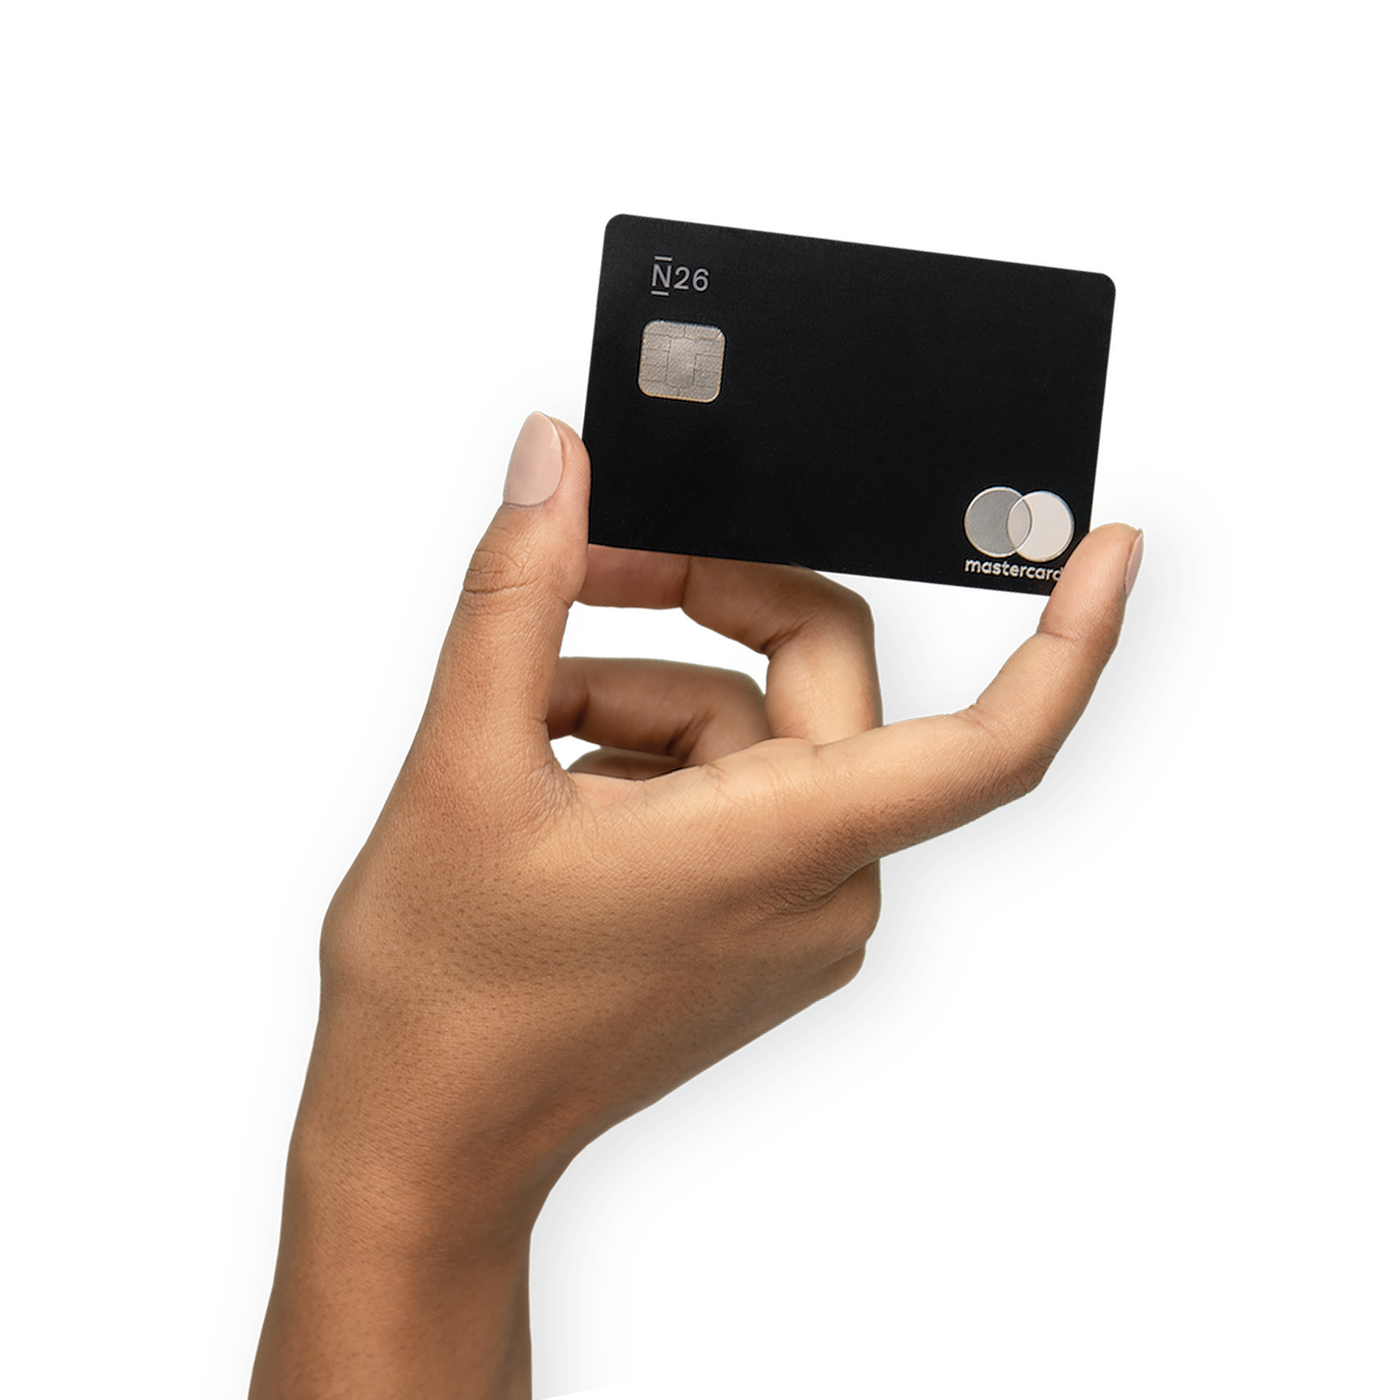 A hand holding a credit card.